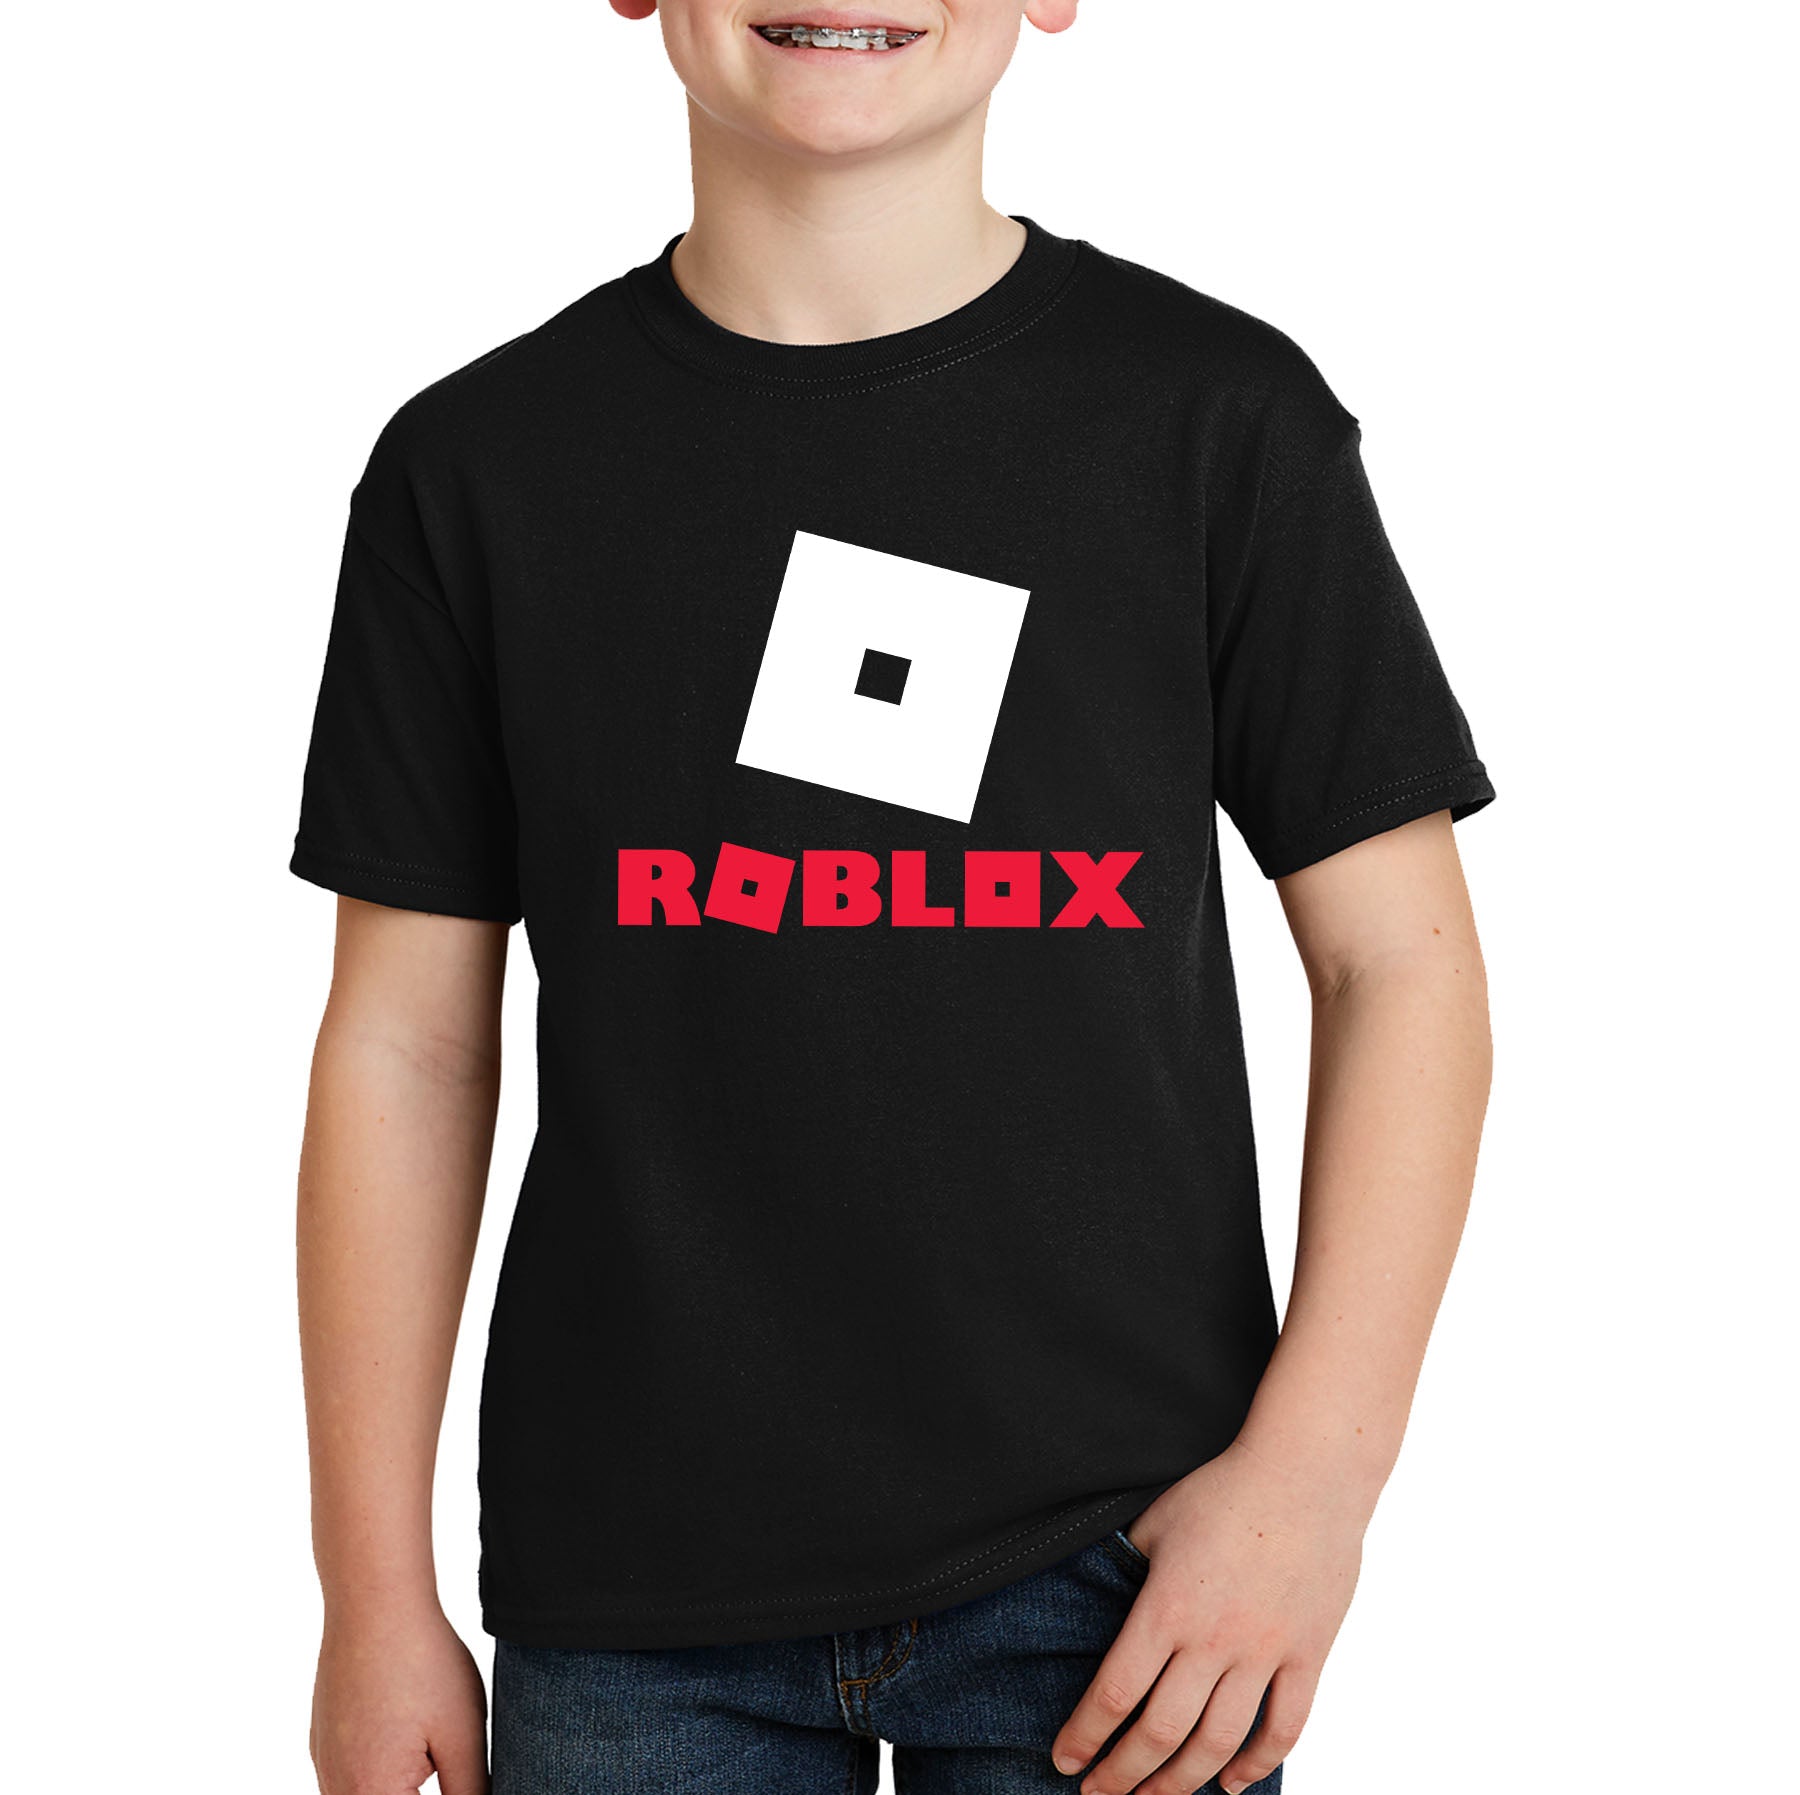 How To Make A Roblox T Shirt On Sale 2020